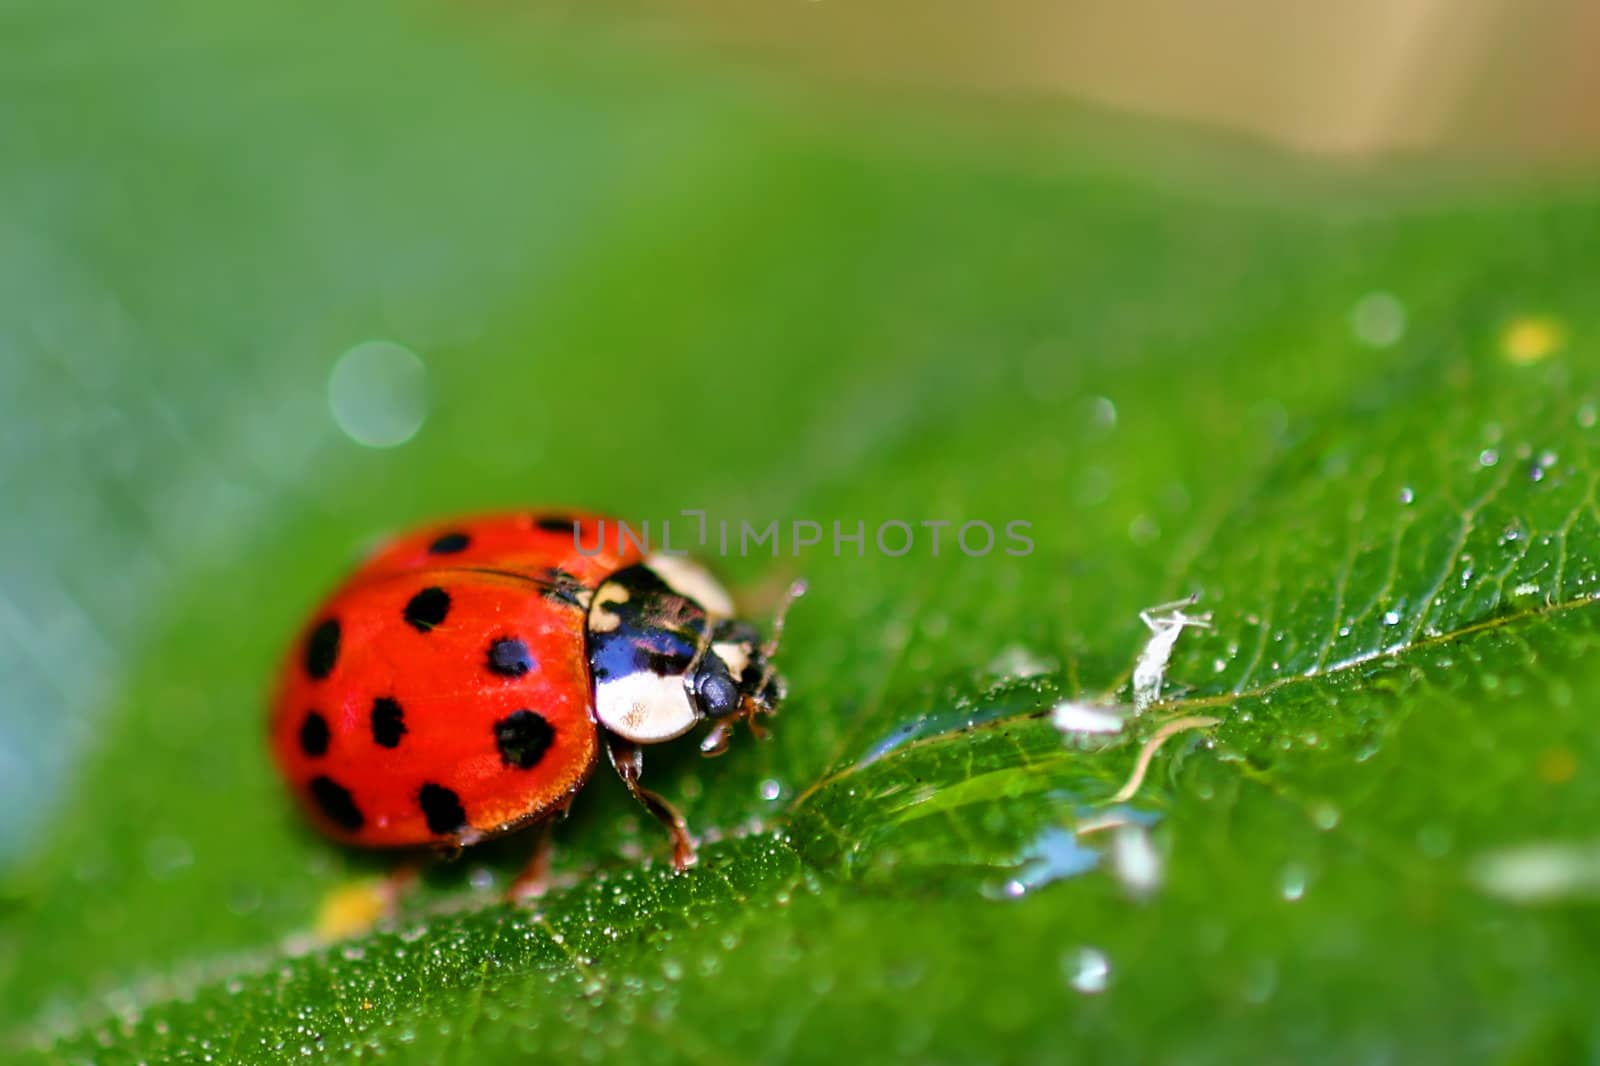 Coccinellids or ladybugs are small insects and are found worldwide with over 5000 species.